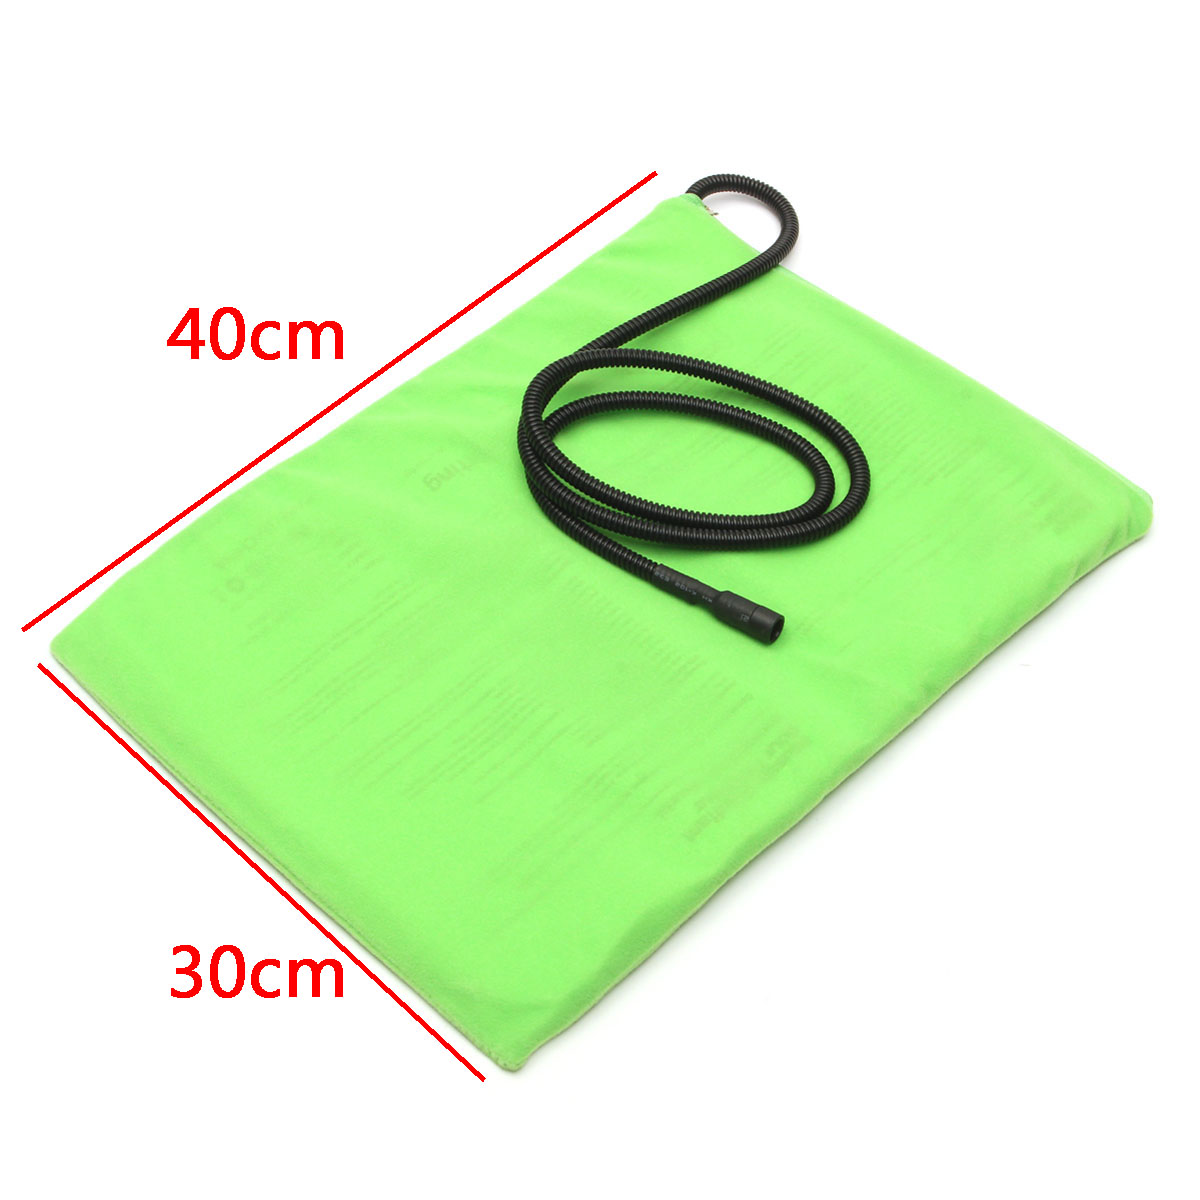 12V-Pet-Heat-Pad-Sotical-Veamor-Electric-Heating-Pad-for-Cats-and-Dogs-Waterproof-Warming-Mat-1239342-5